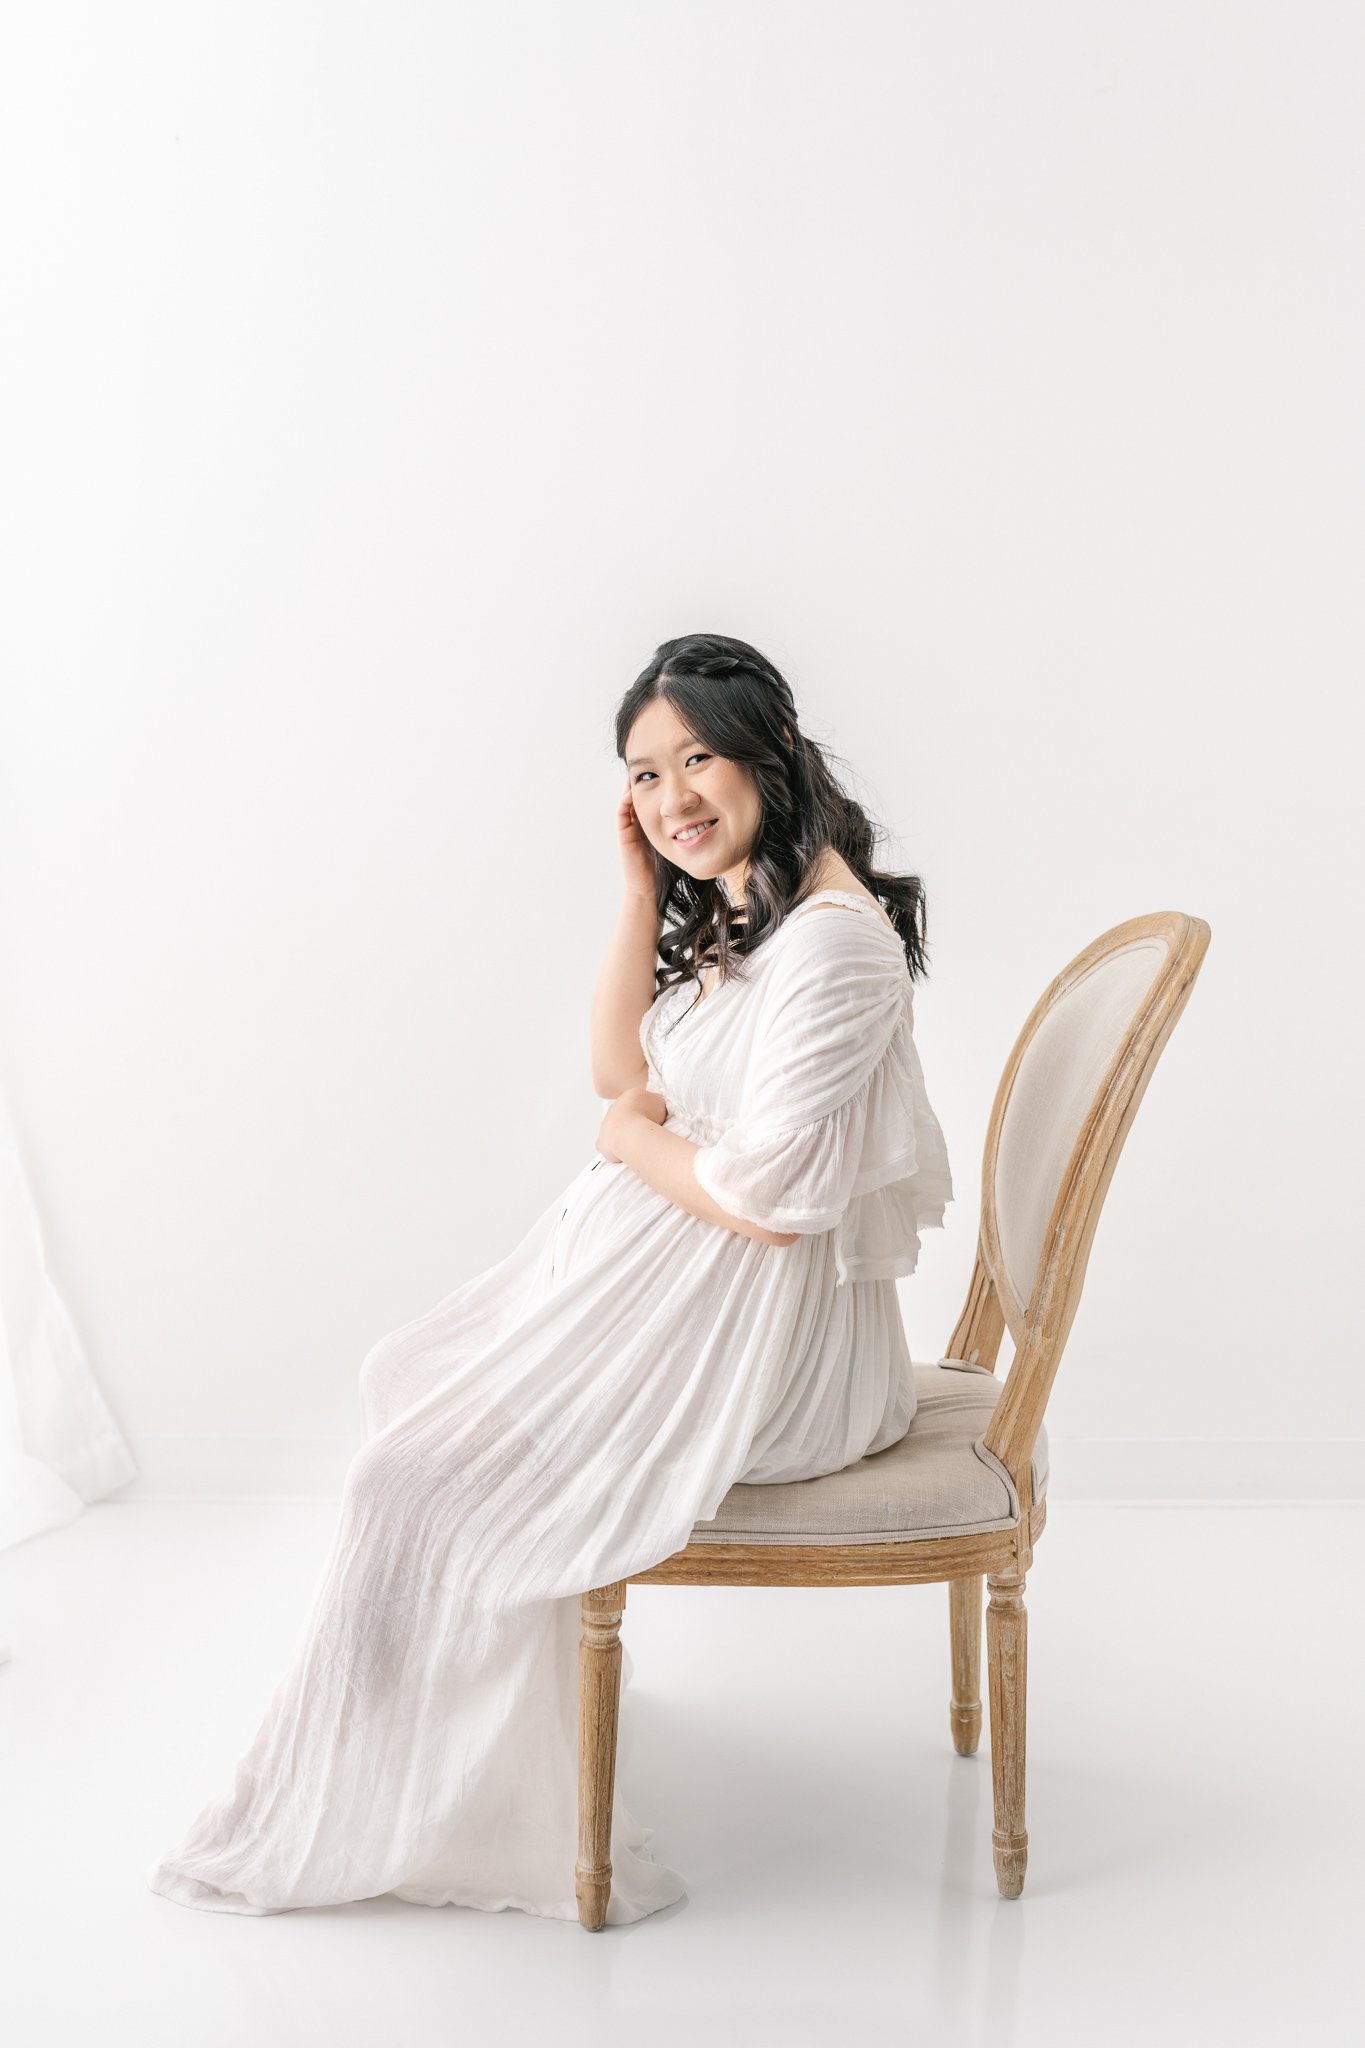  Soon-to-be mother sitting on a chair in a white studio by Nicole Hawkins photography in New Jersey. new jersey maternity photography #NicoleHawkinsPhotography #NicoleHawkinsMaternity #MaternityPhotography #Maternitystyle #NJMaternity #TimelessPortra